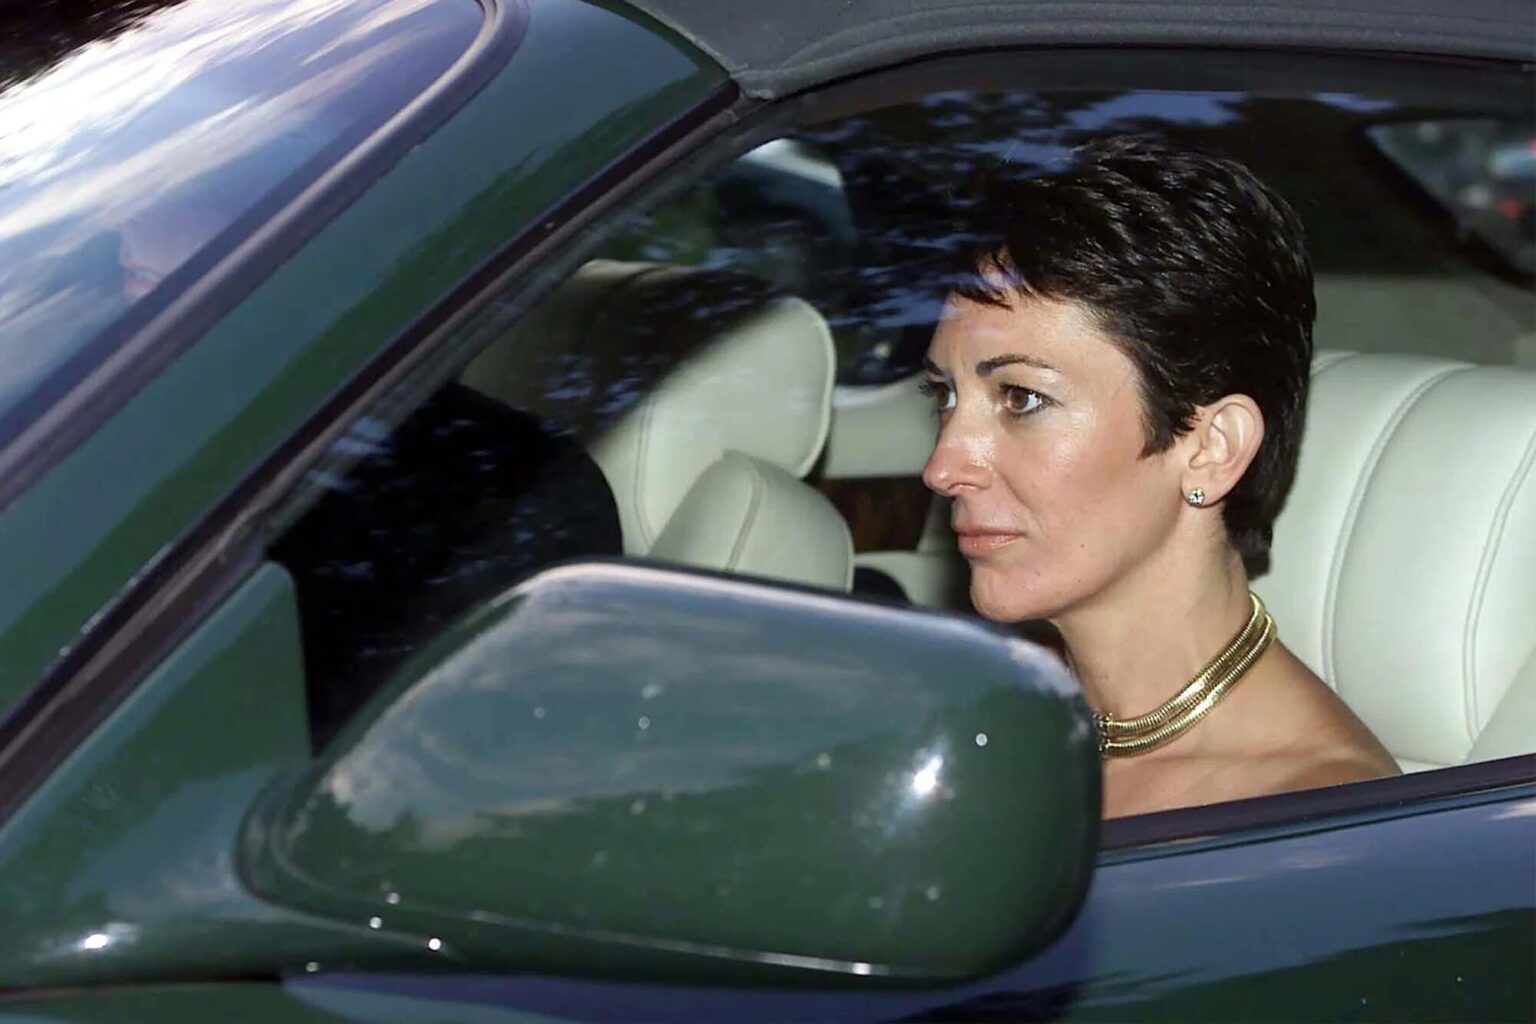 Here’s what we know about Ghislaine Maxwell, what she knows about Jeffrey Epstein, and where this could be headed.